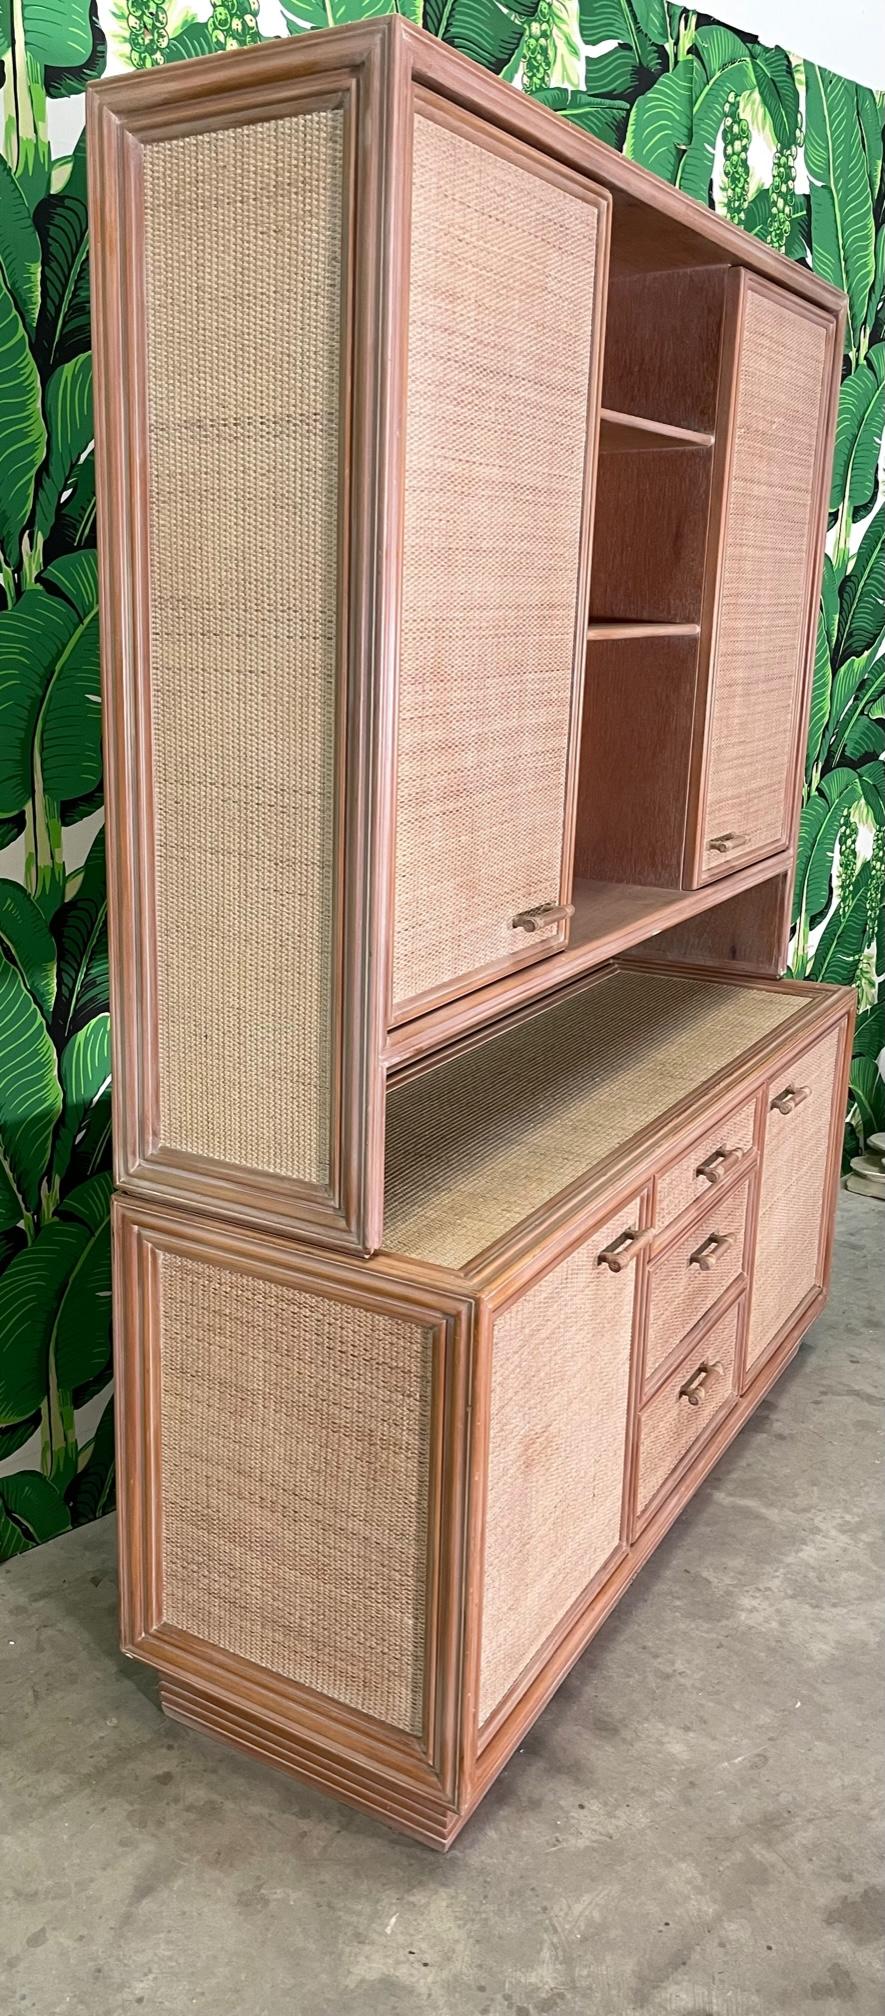 Rattan and Wicker Sideboard and Hutch In Good Condition For Sale In Jacksonville, FL